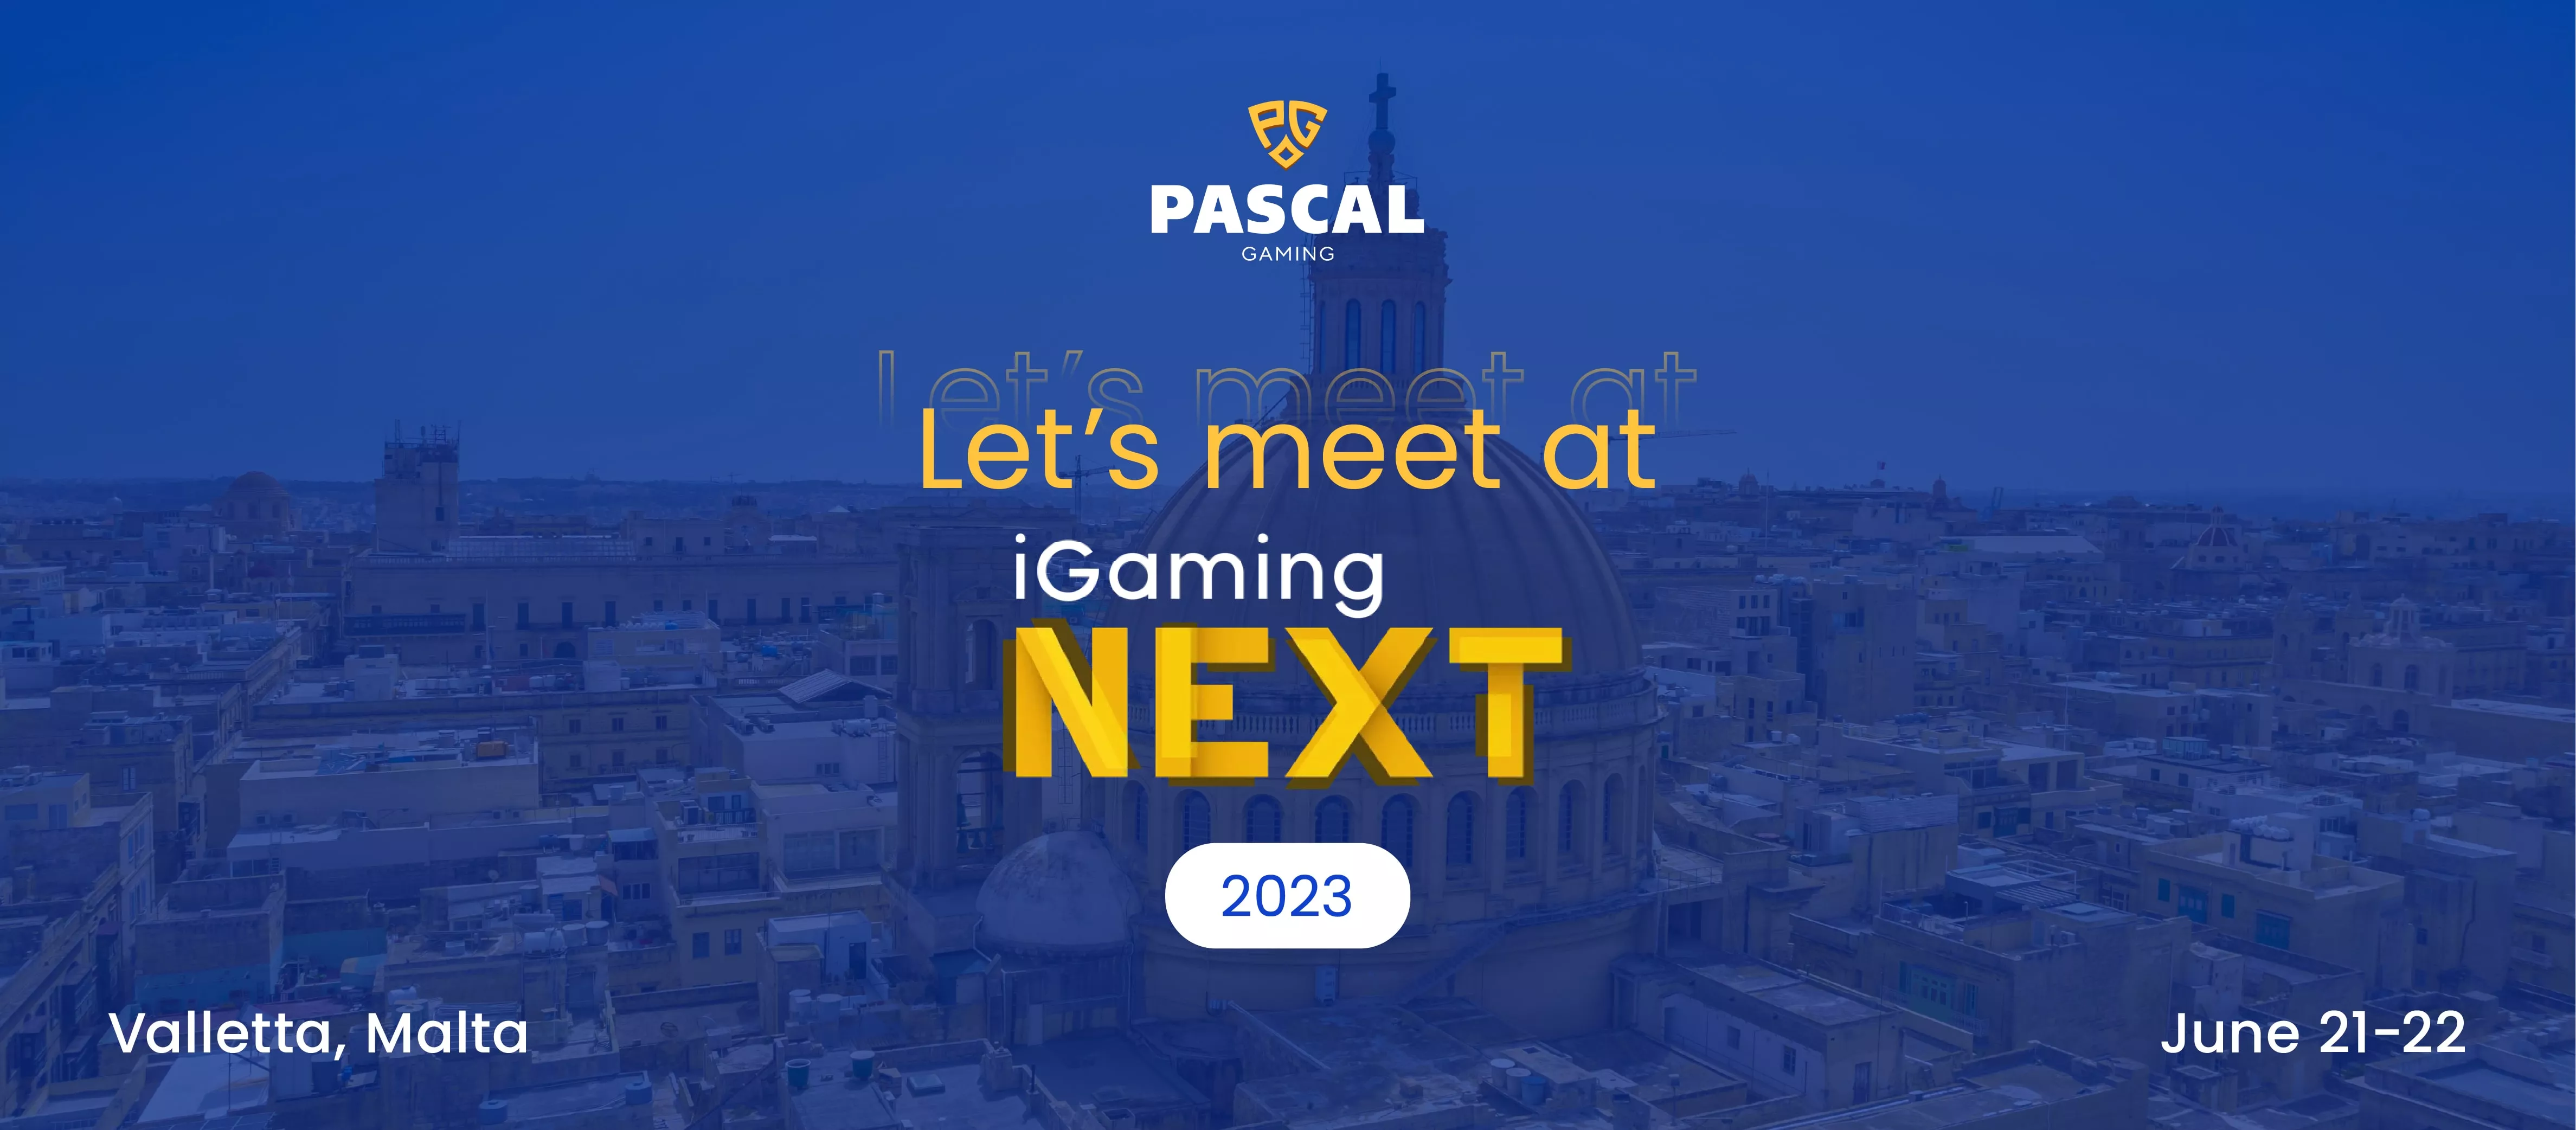 Pascal Gaming attends iGaming Next 2023 in Malta